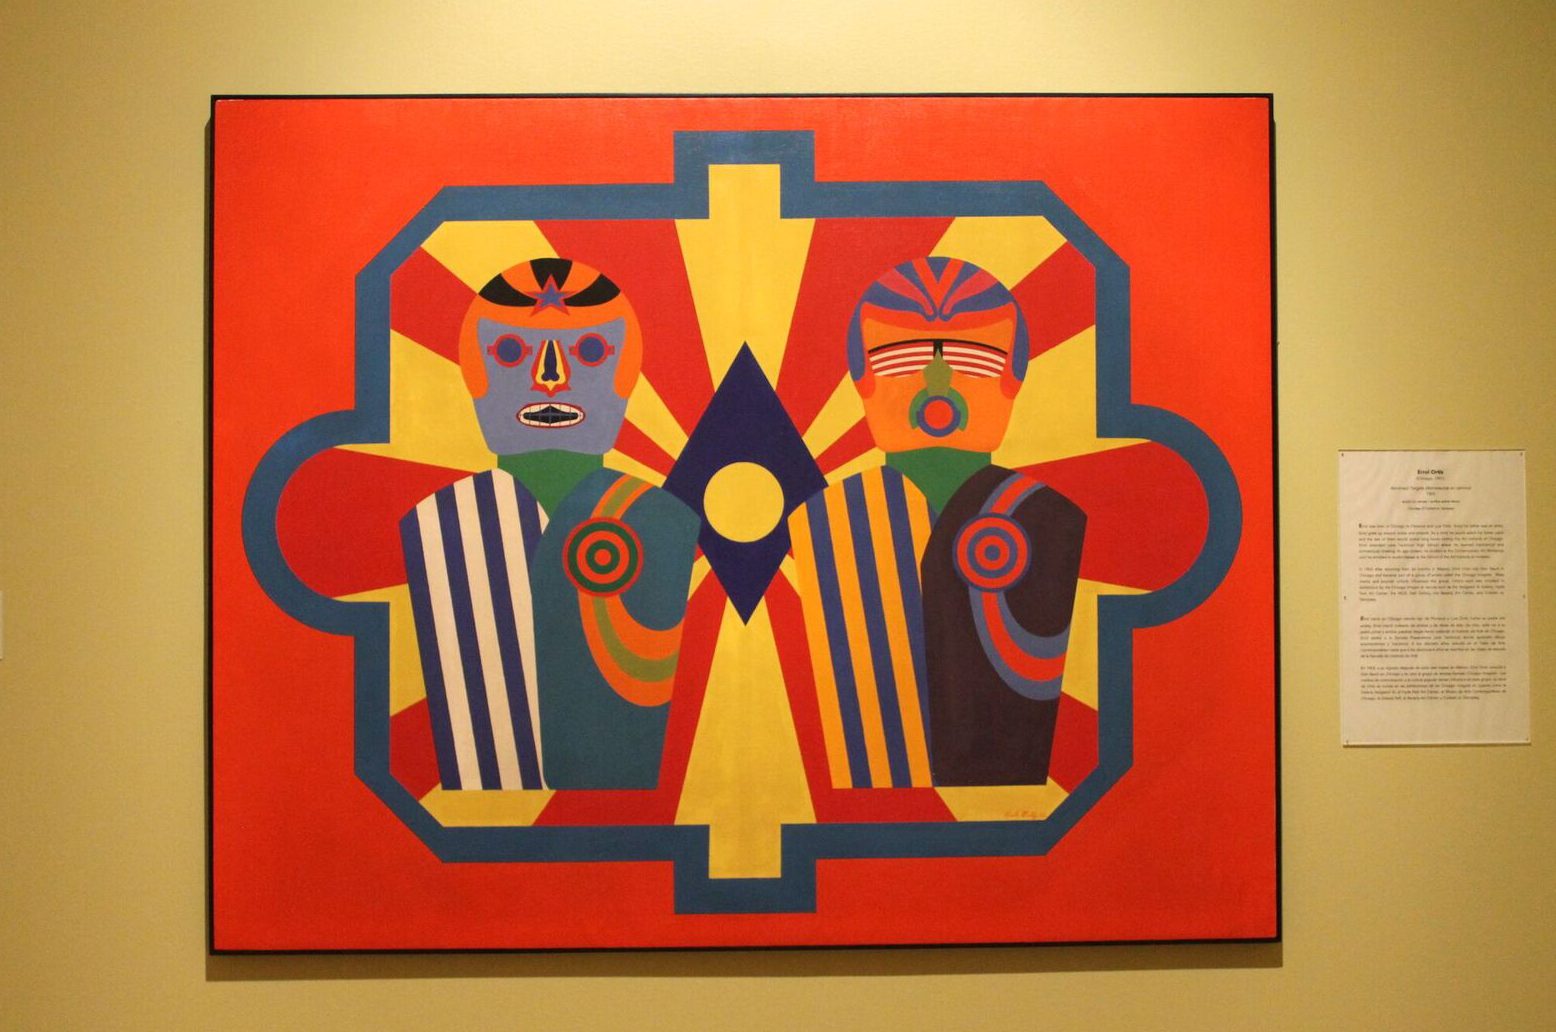 Astronaut Targets by Errol Ortiz. Red and yellow rays emanate from a blue and yellow diamond shape in the background of the painting. Two colorful figures wearing striped suits, and helmets with stylized features stand in the foreground side by side. Photo by Melissa Patiño Cervantes.